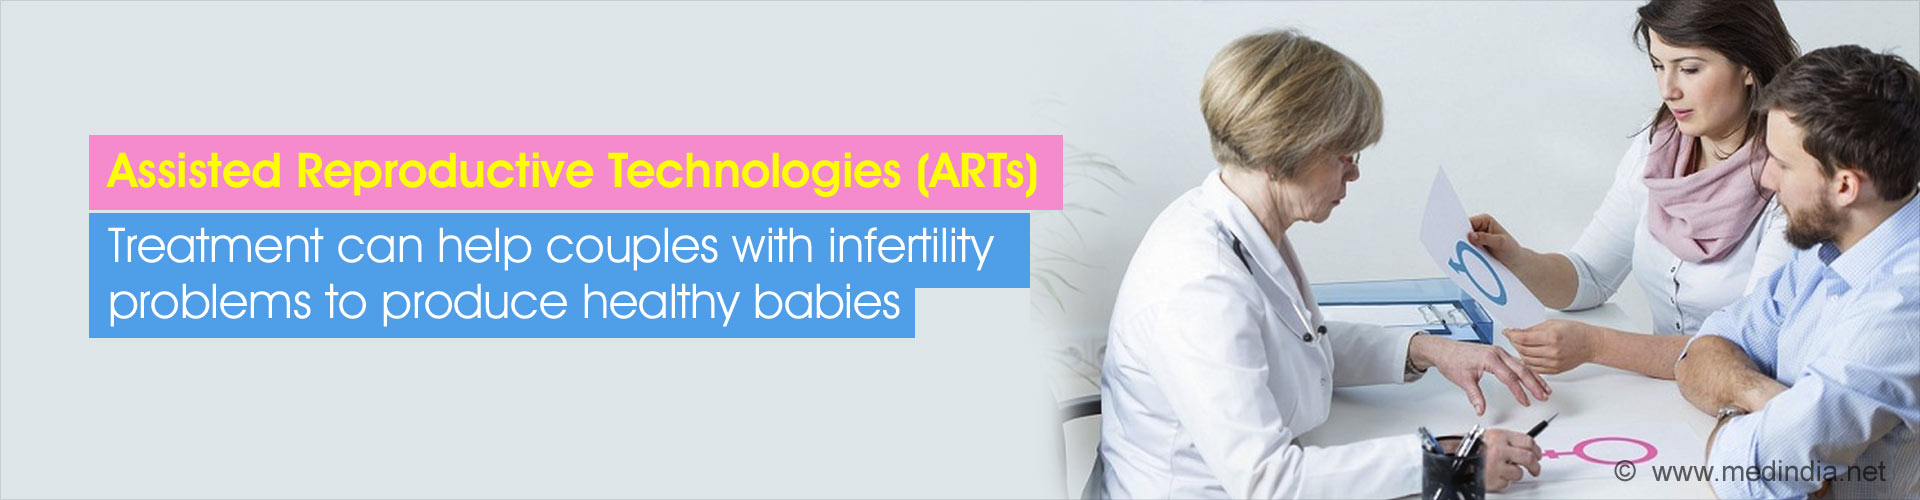 Assisted Reproductive Technologies (ARTs)
Treatment can help couples with infertility problems to produce healthy babies
